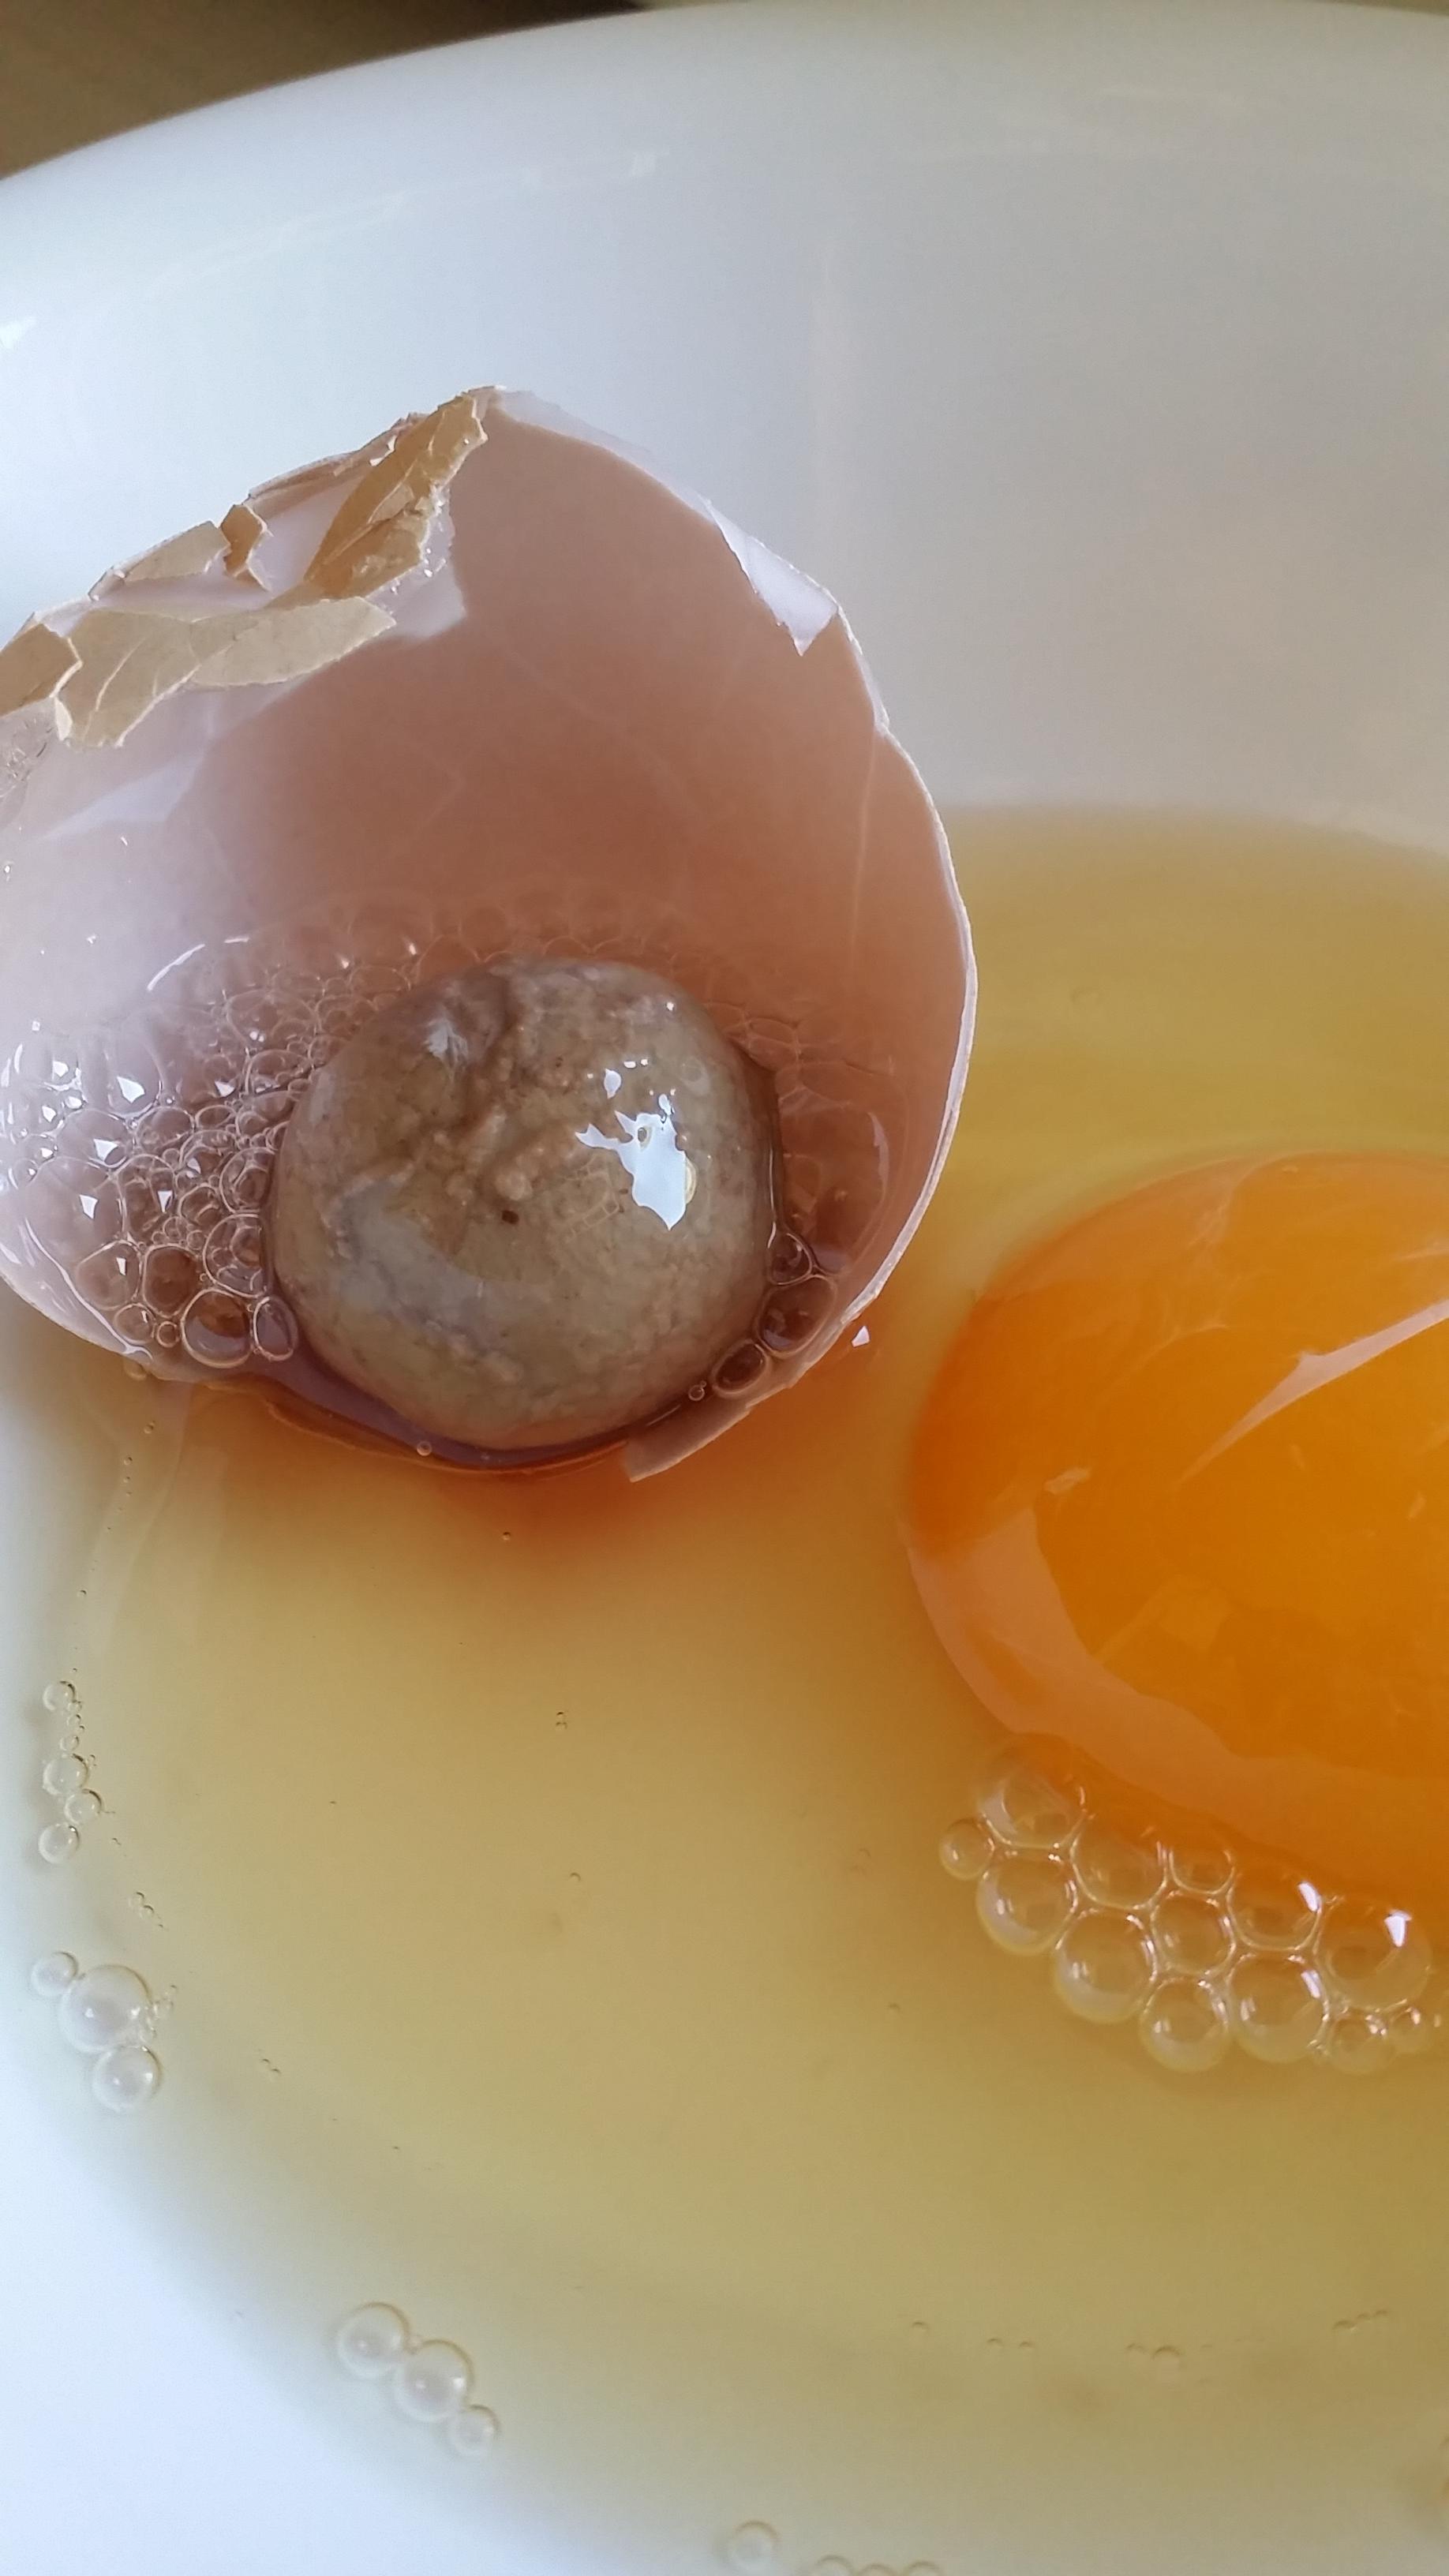 Cracked it open. Got a normal yolk plus this brown-grey blob.